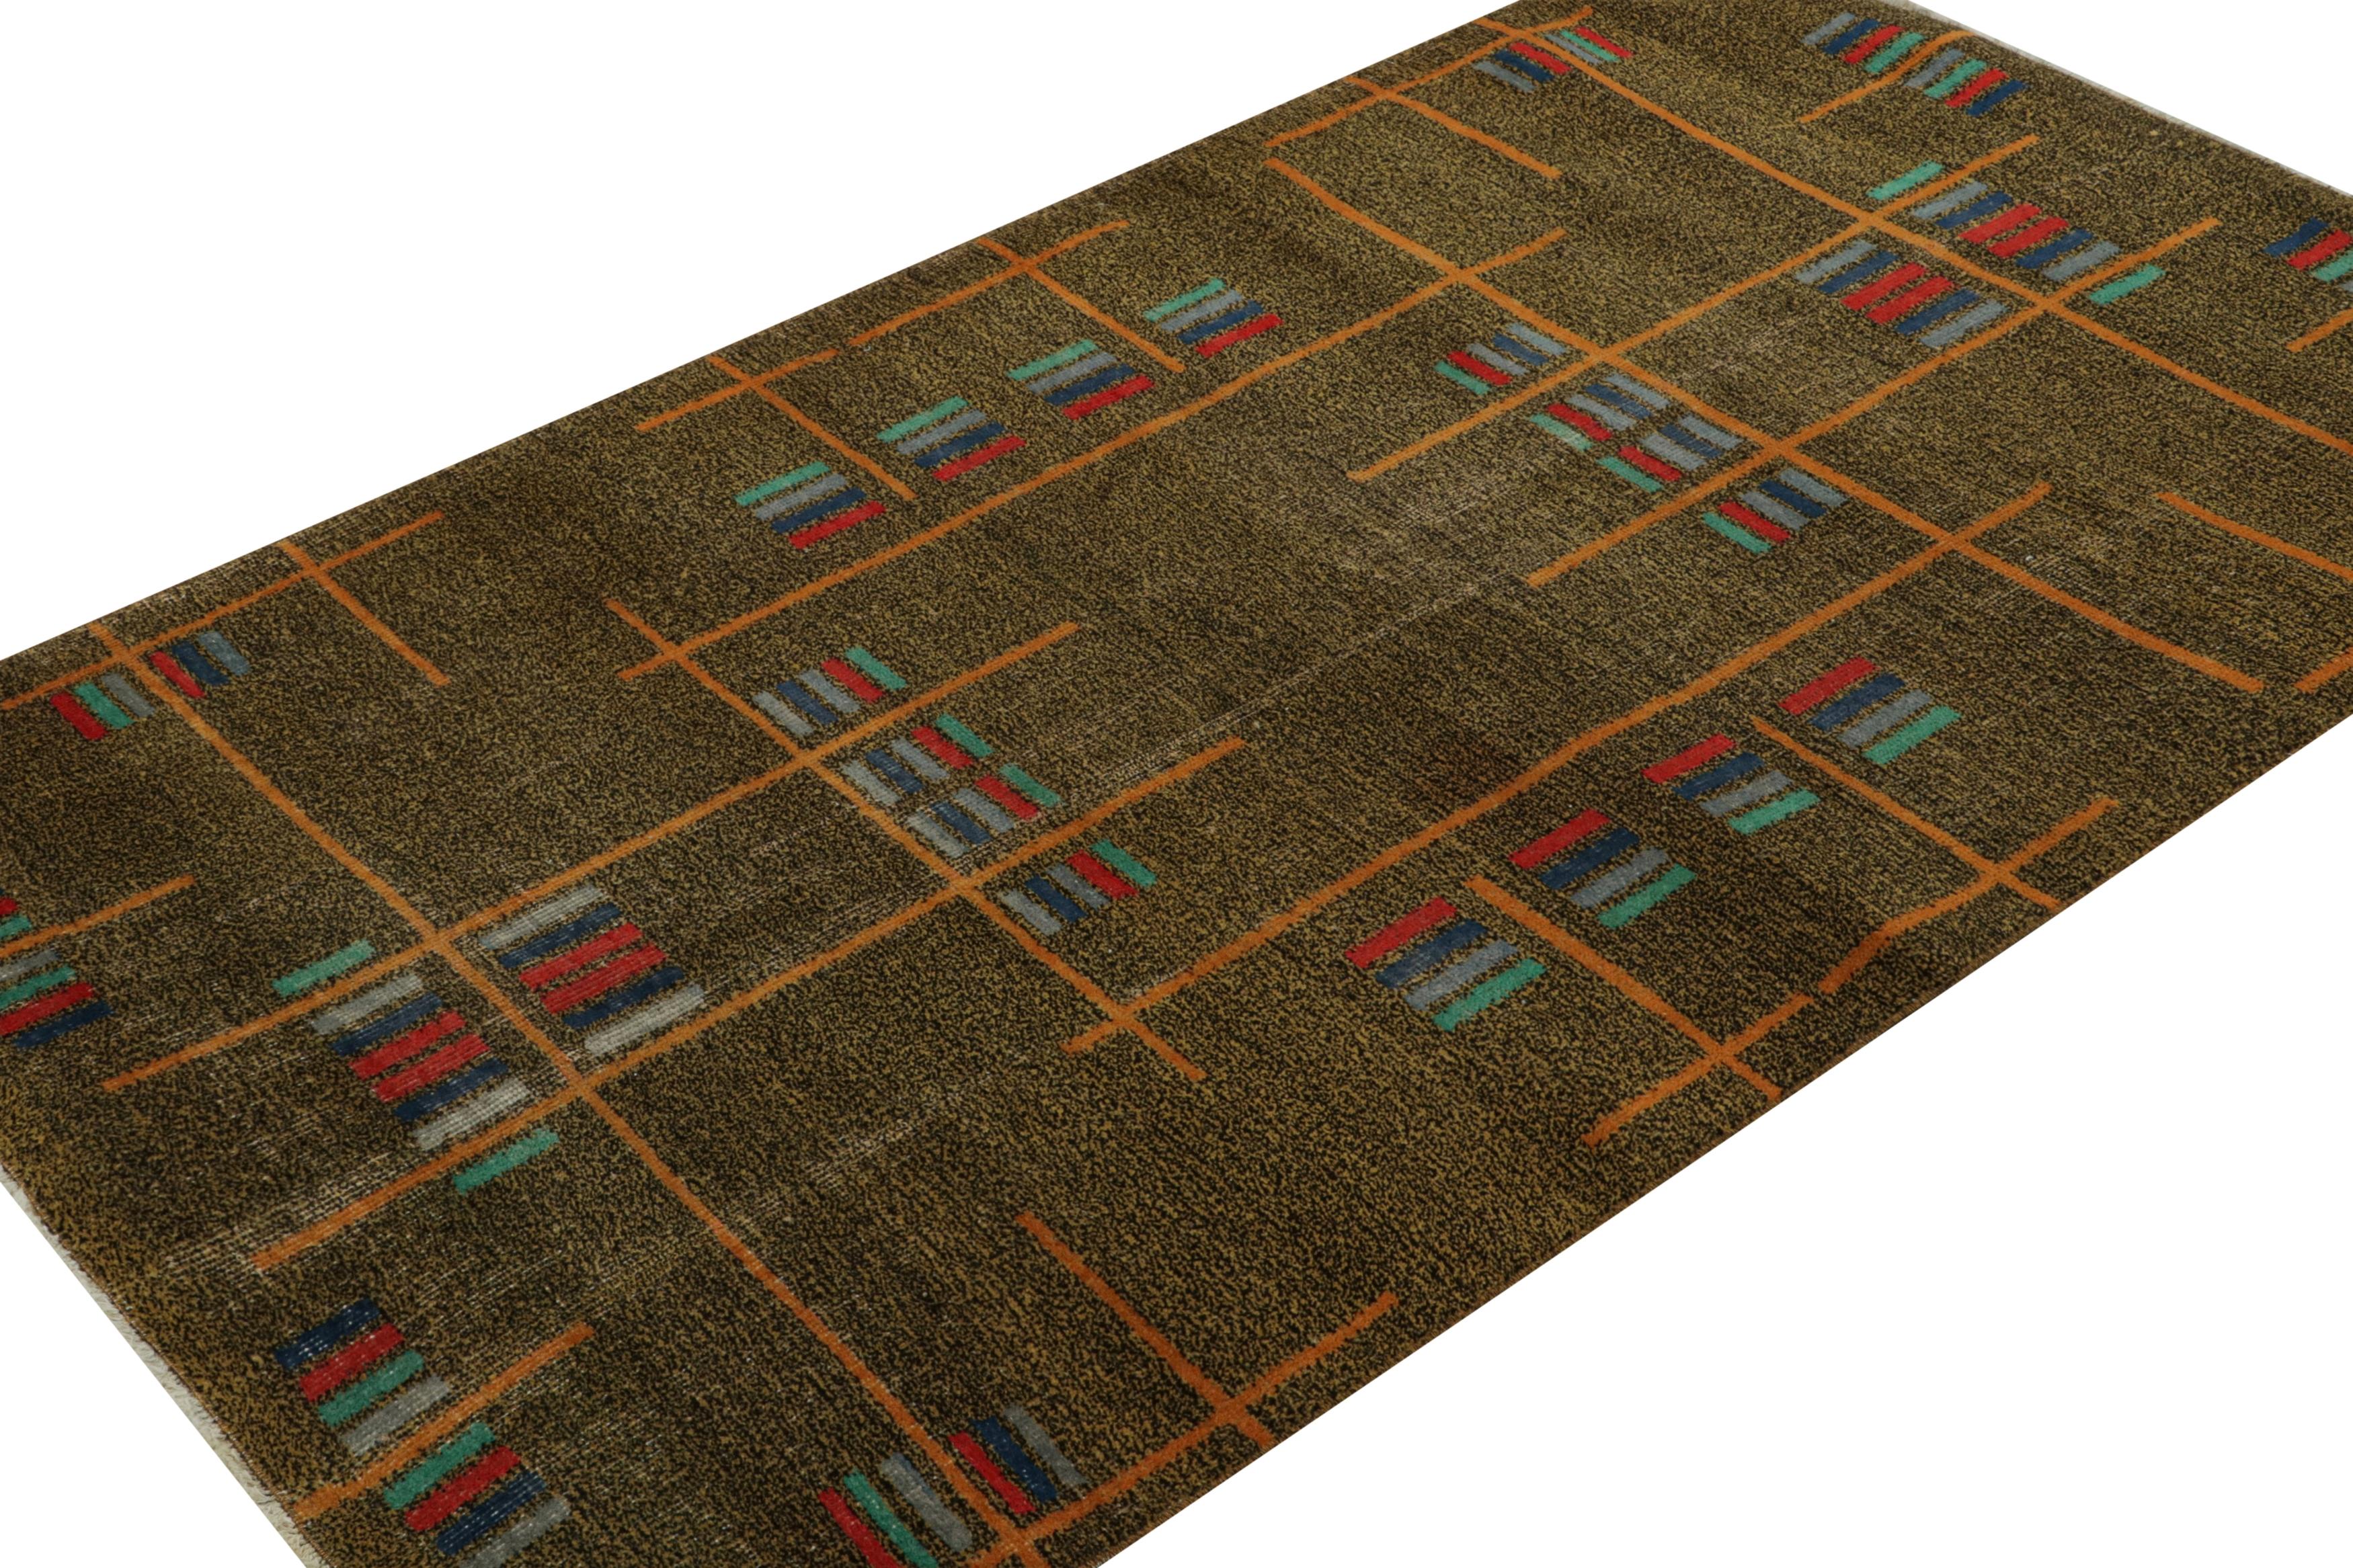 Hand-knotted in wool, circa 1960 - 1970, this 4x6 vintage Müren Art Deco rug is an exciting new addition to Rug & Kilim Mid-century Pasha Collection. Its design is believed to be a rare work of mid-century atelier Zeki Müren. 

On the design: 

From